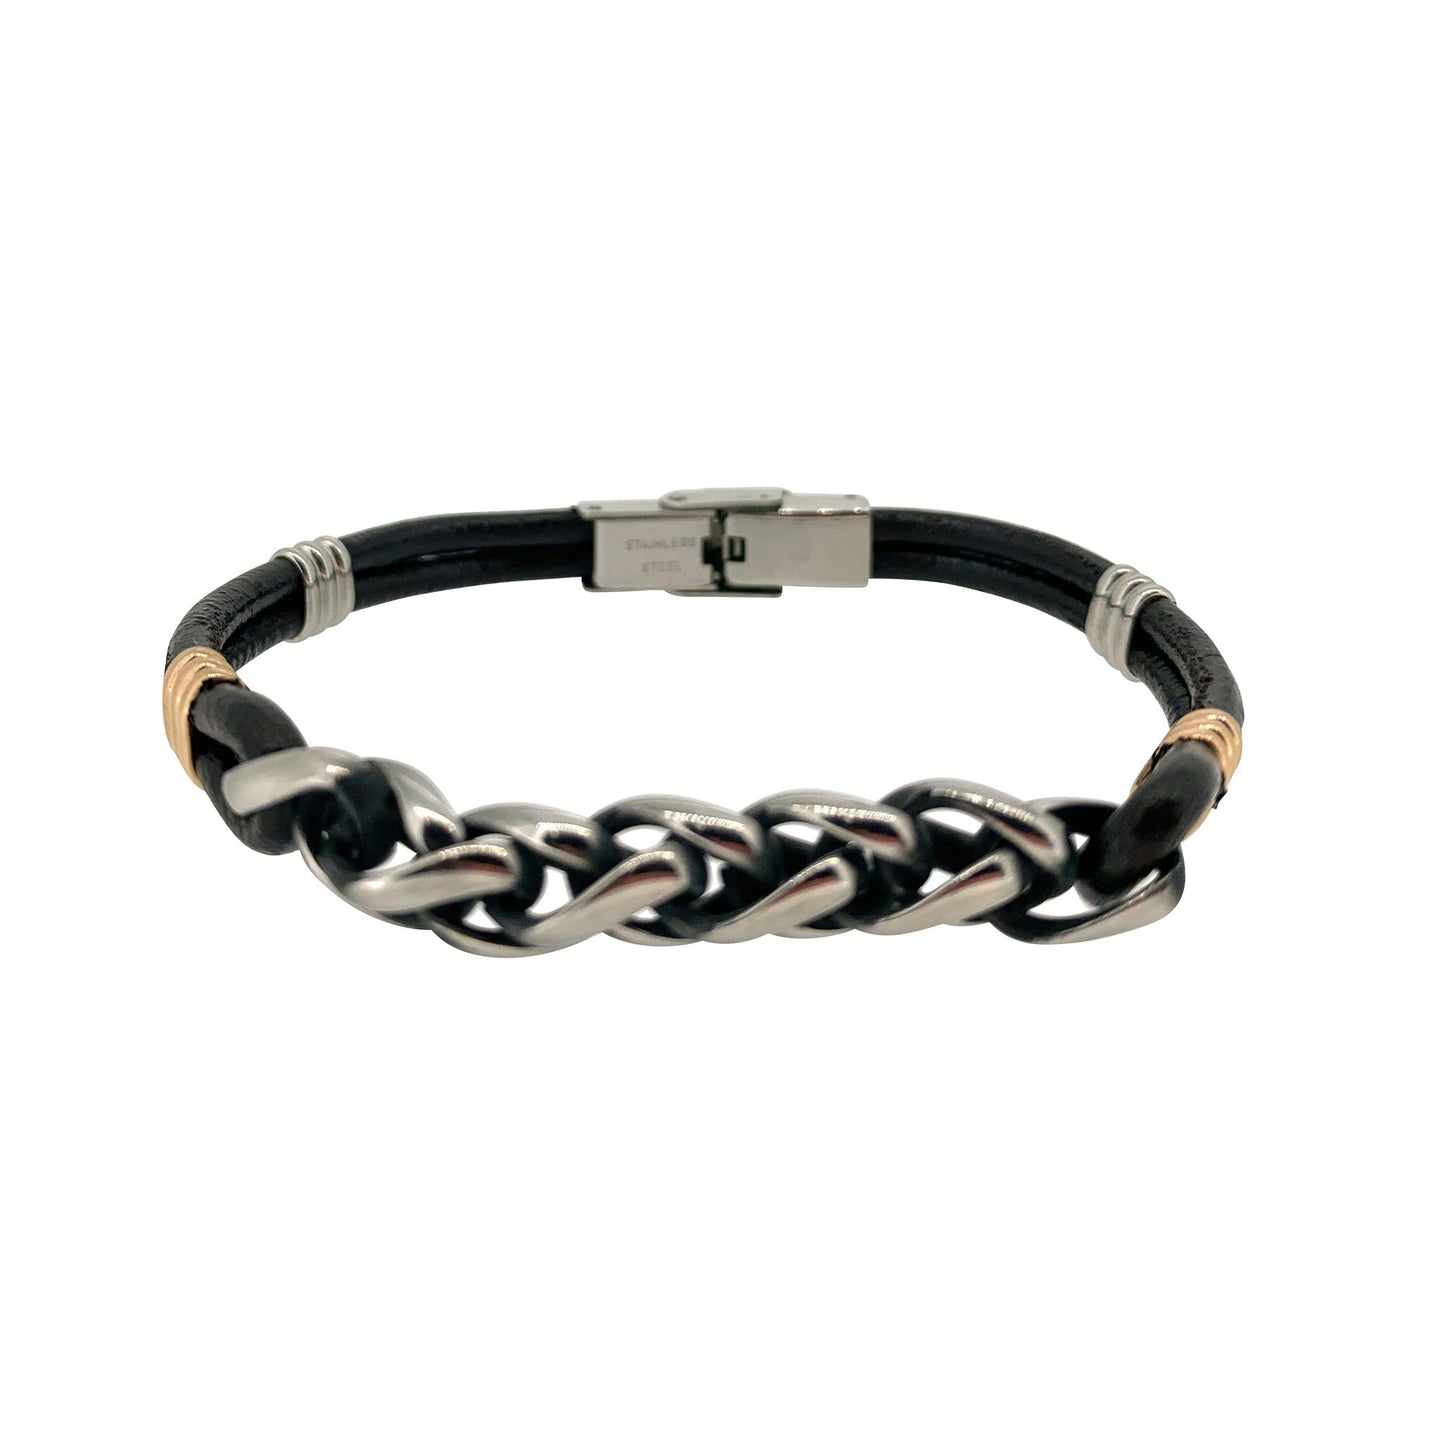 A black leather 2 cord bracelet with stainless steel central wheat chain displayed on a neutral white background.